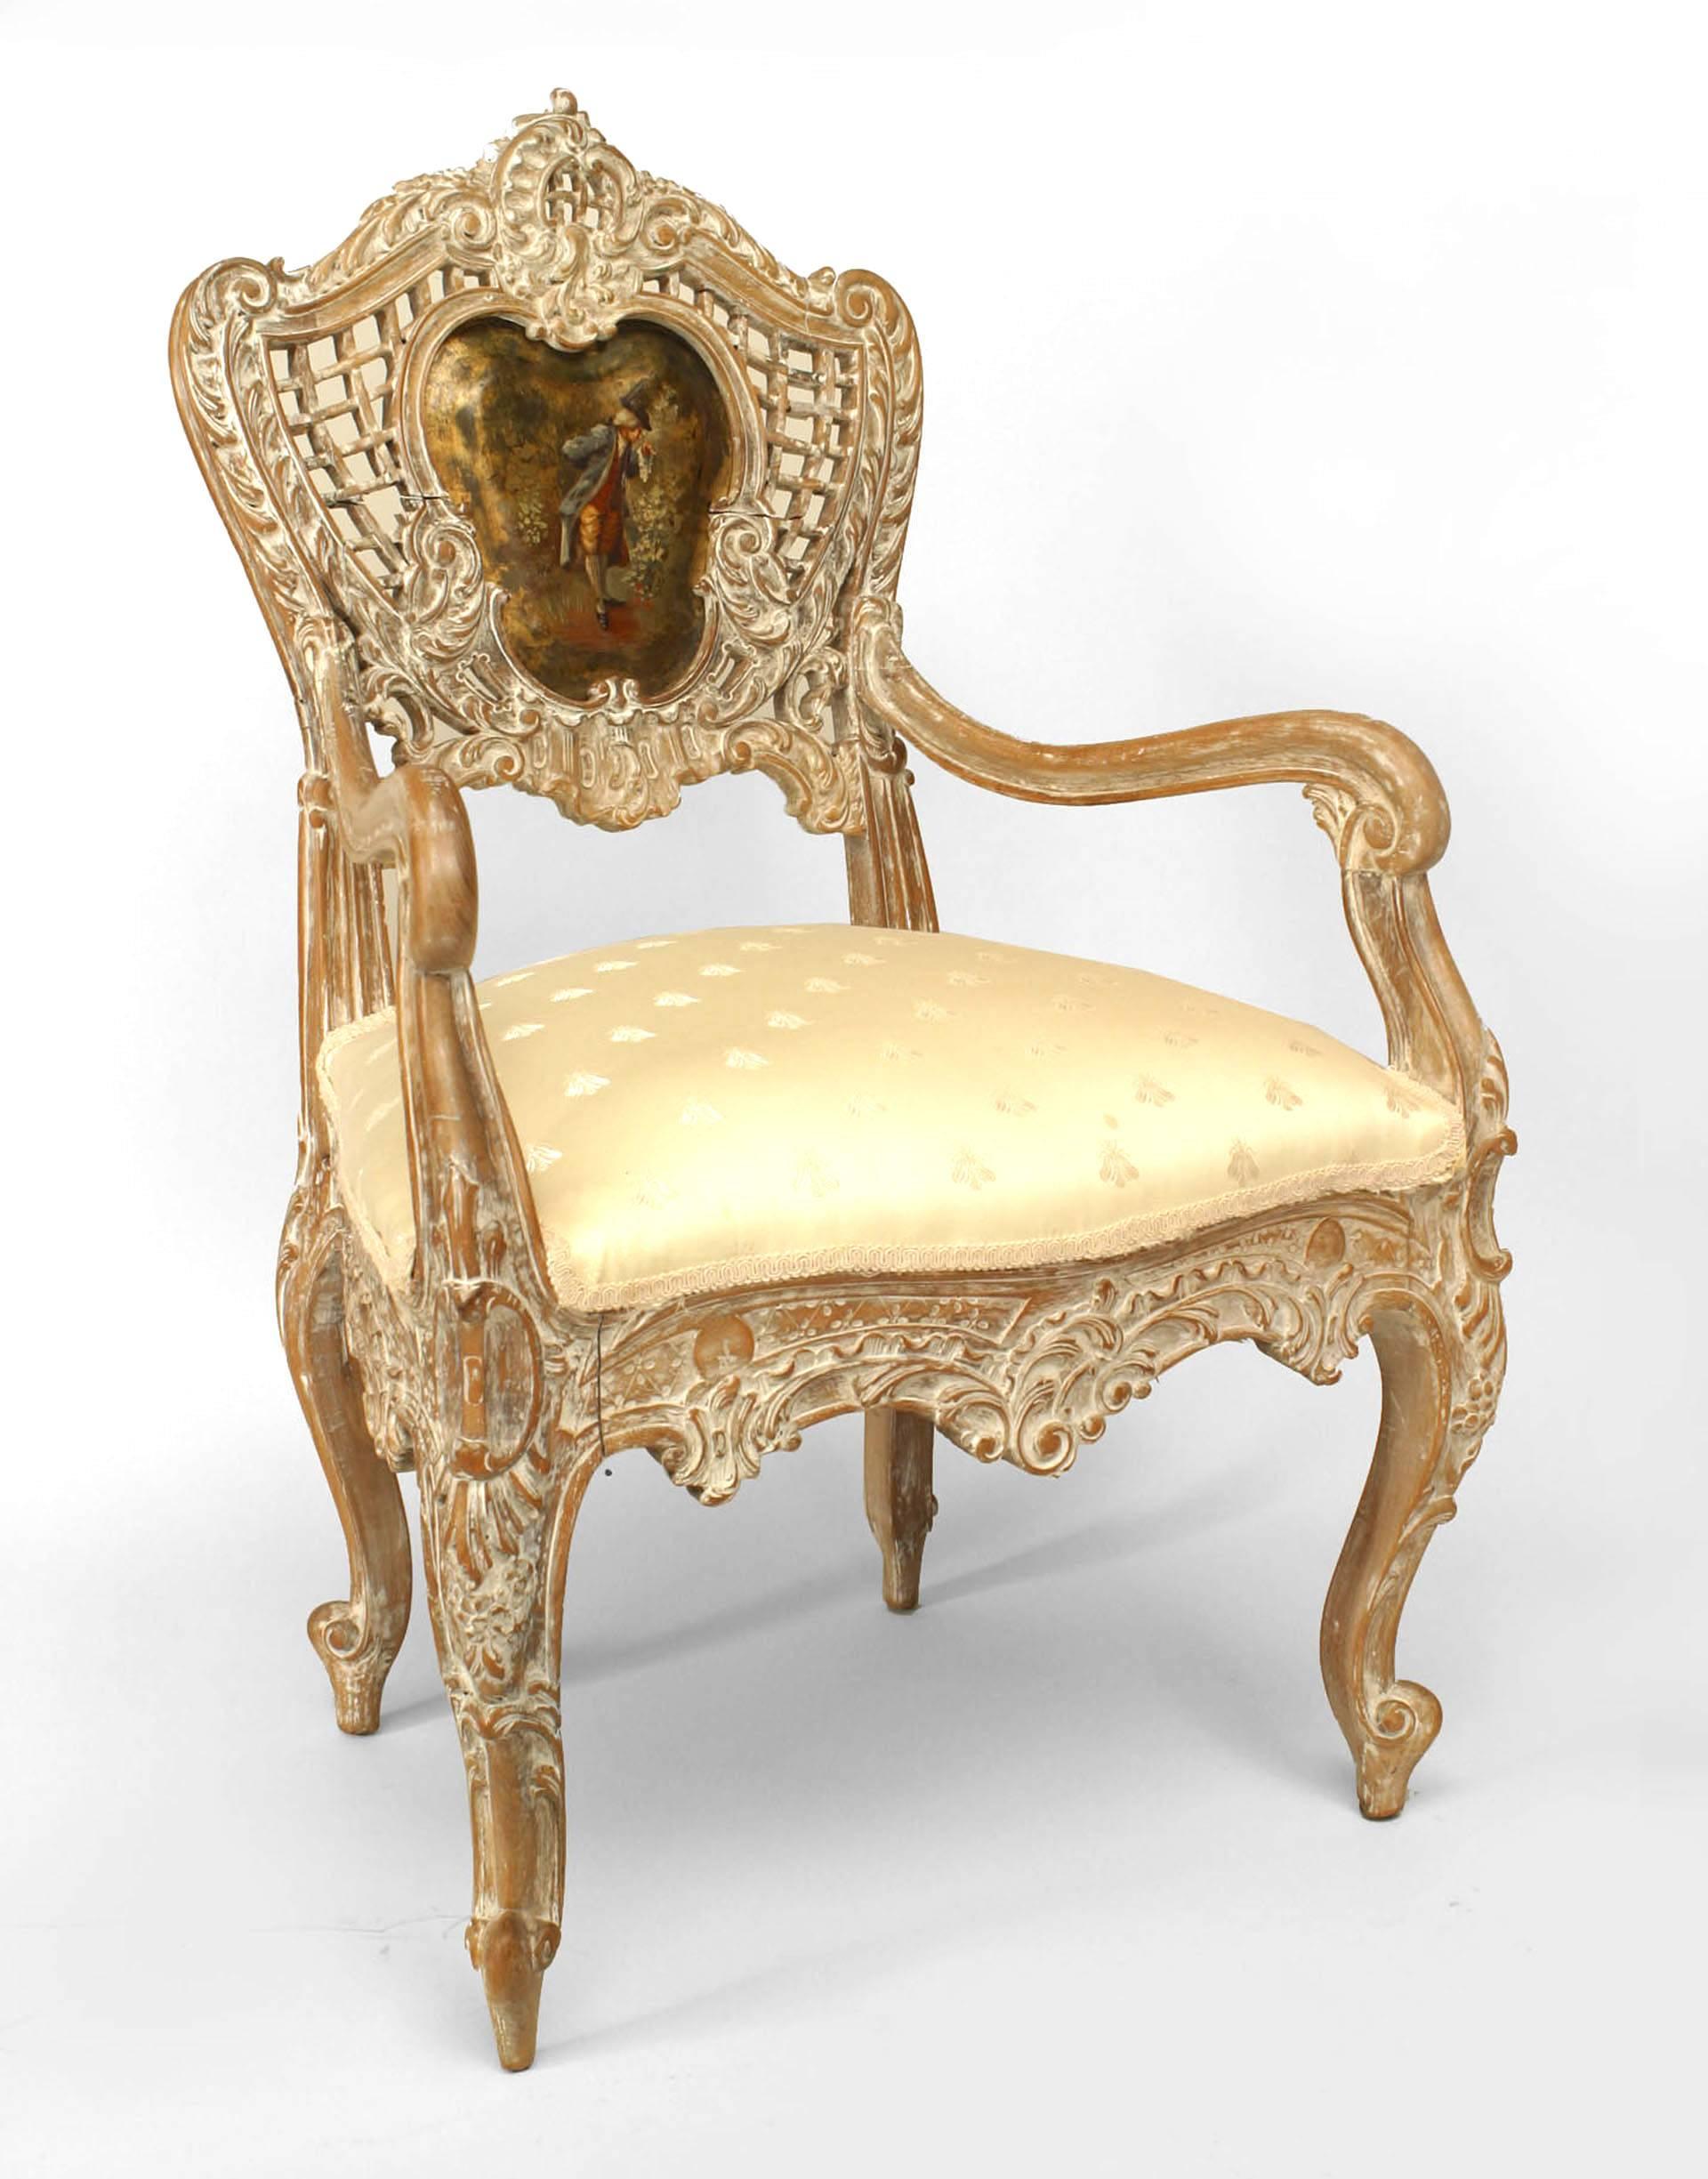 Pair of French Louis XV-style (19th Century) bleached wood armchairs with carved open lattice backs centering shaped painted panels with figural scenes and white upholstered seats. (PRICED AS Pair)
